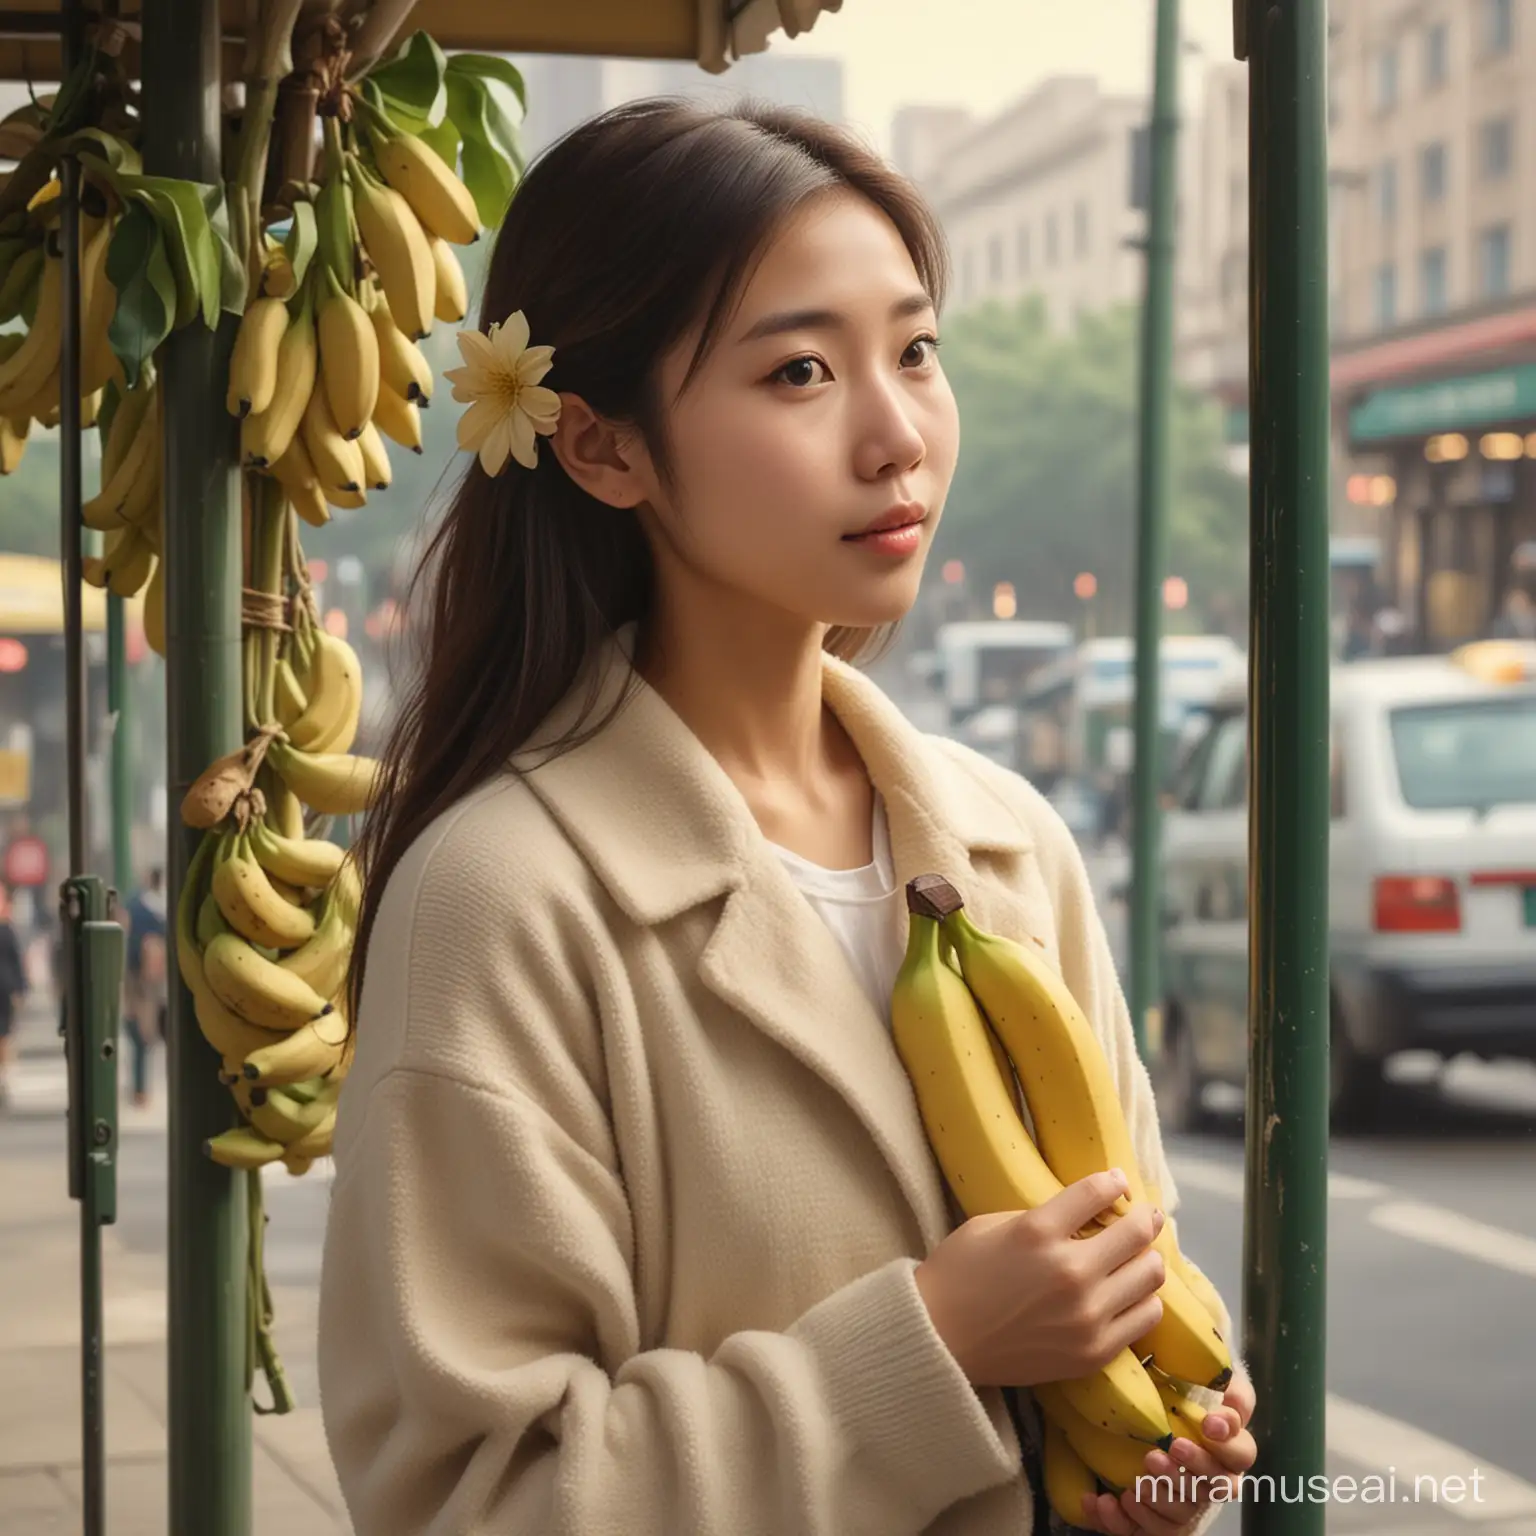 Taiwanese Girl with Bananas at Dreamy City Bus Stop Claude Monet Style